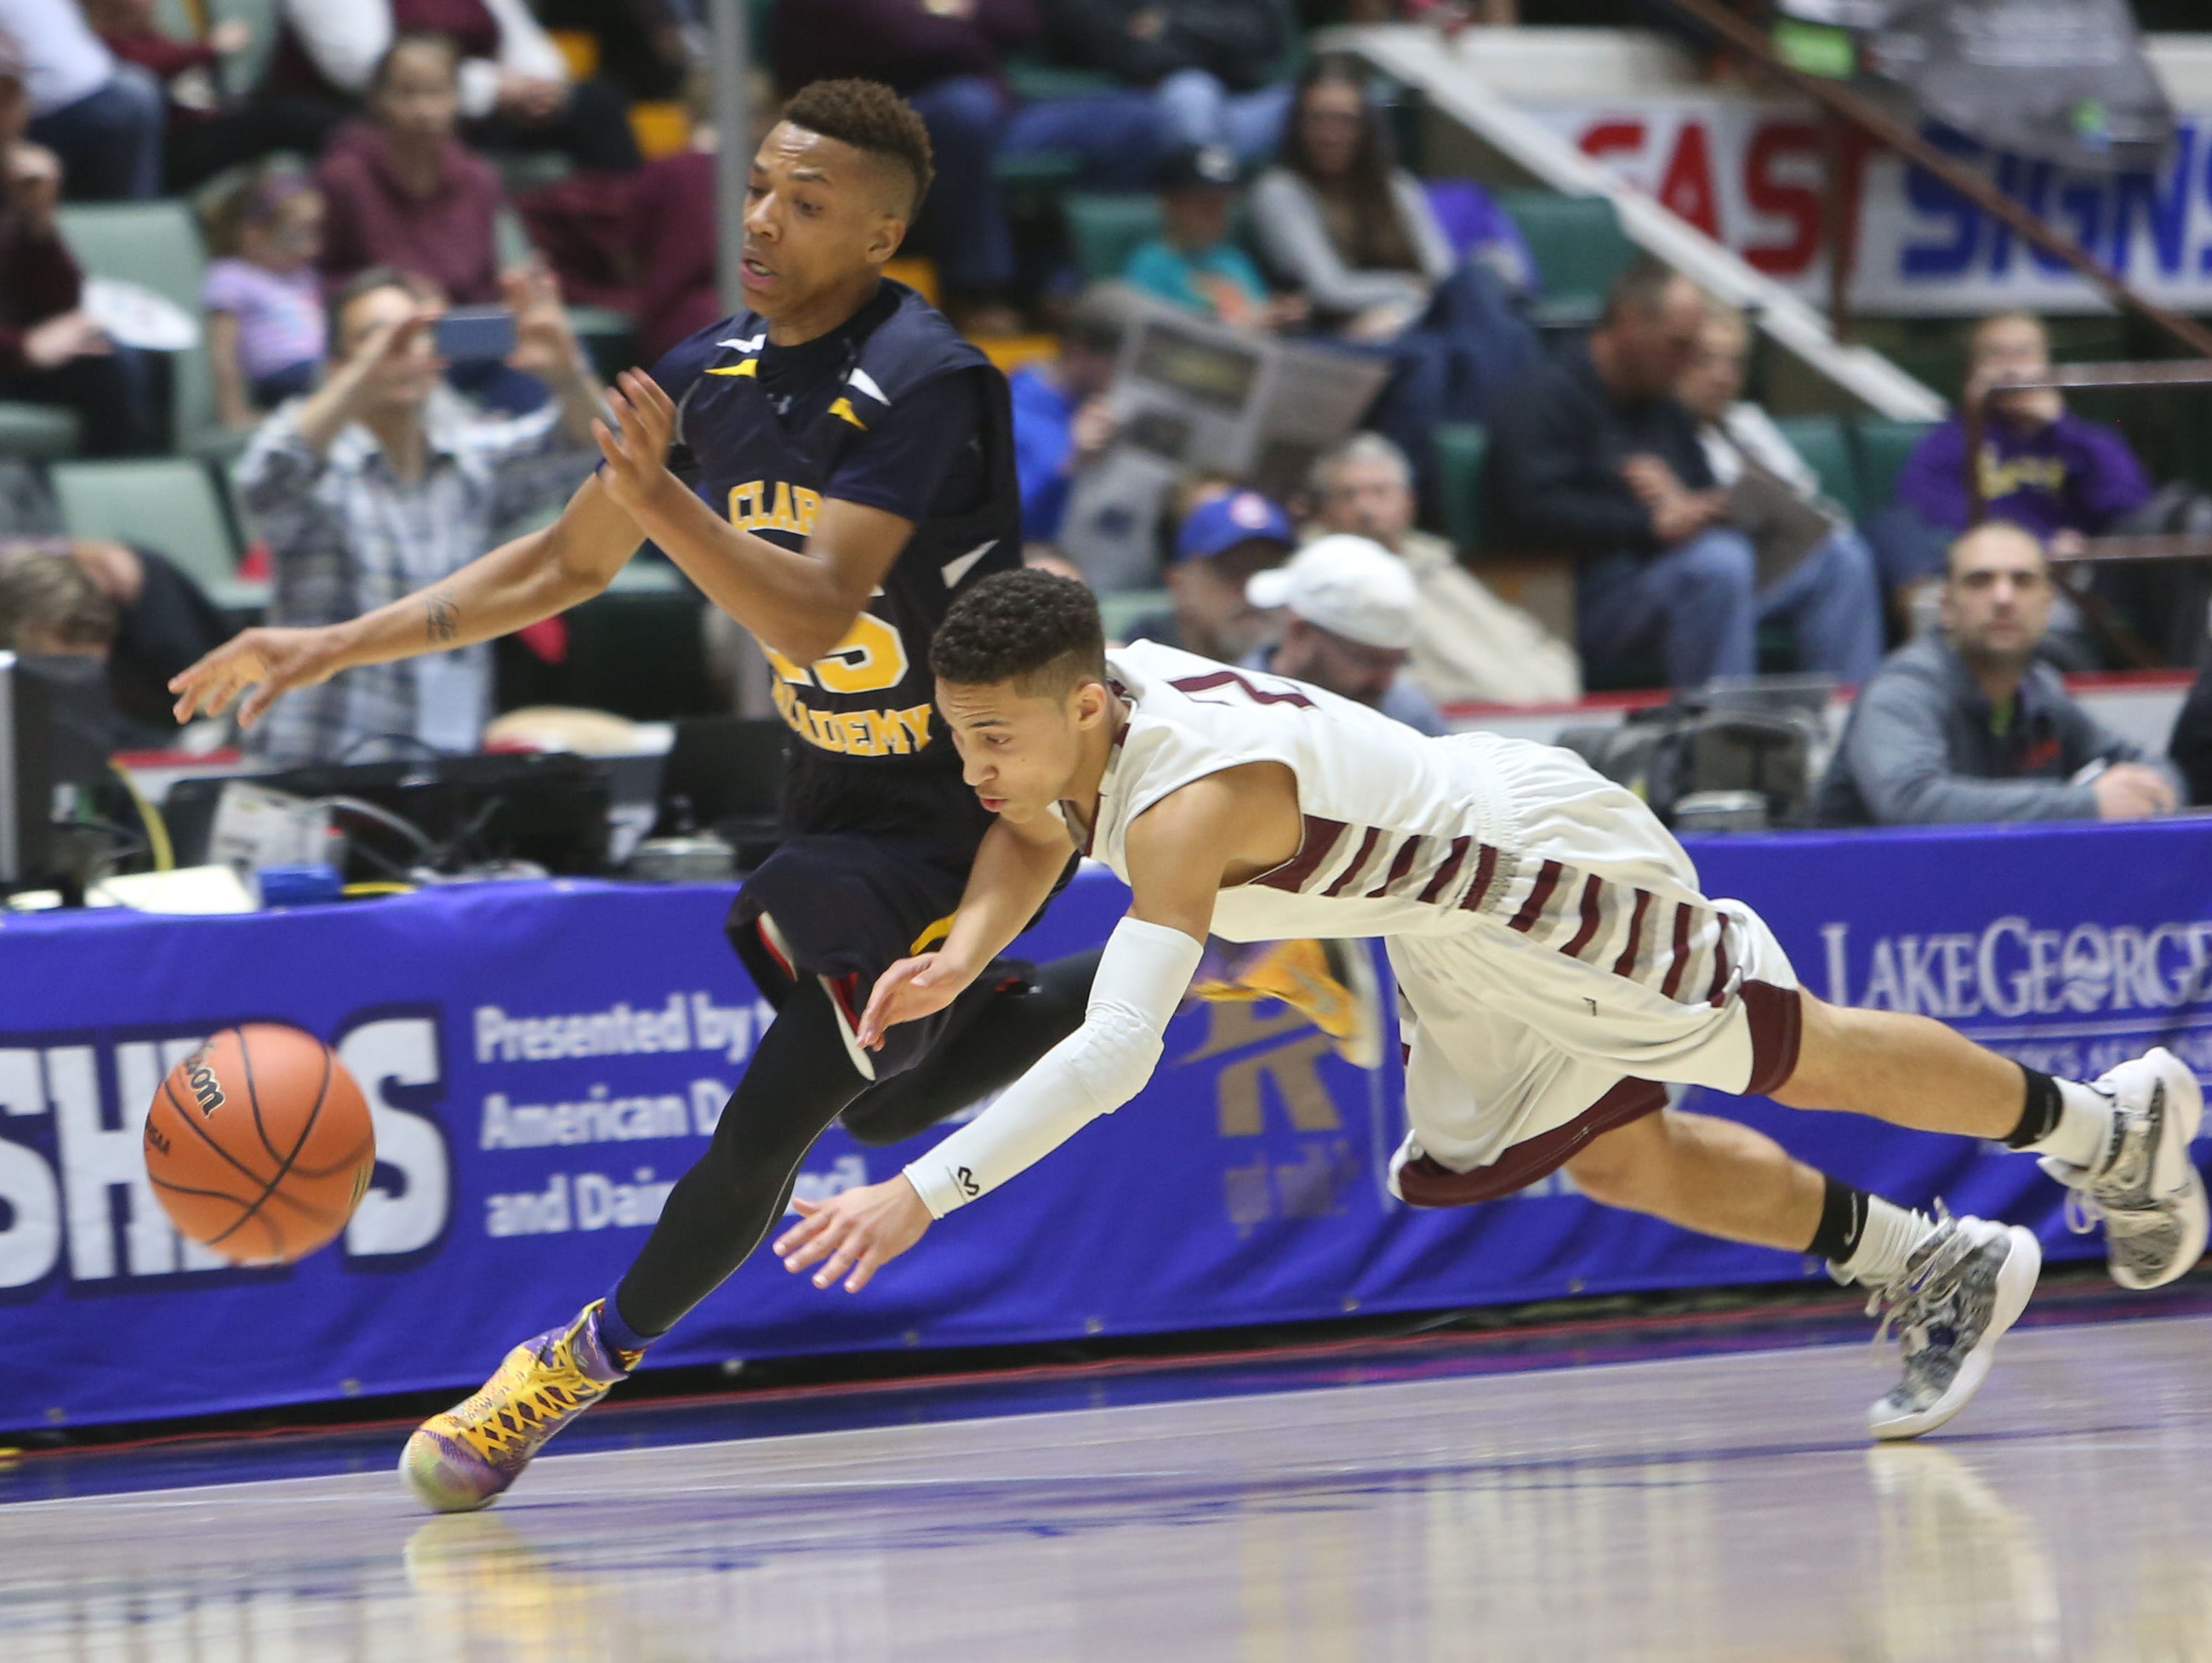 From left, Clark Academy's Andrew Carthon (25) and Oriskany's Marcus Smithing (2) battle for a loose ball during the boys Class D semifinal at the Glens Falls Civic Center March 11, 2016. Oriskany won the game 59-40.